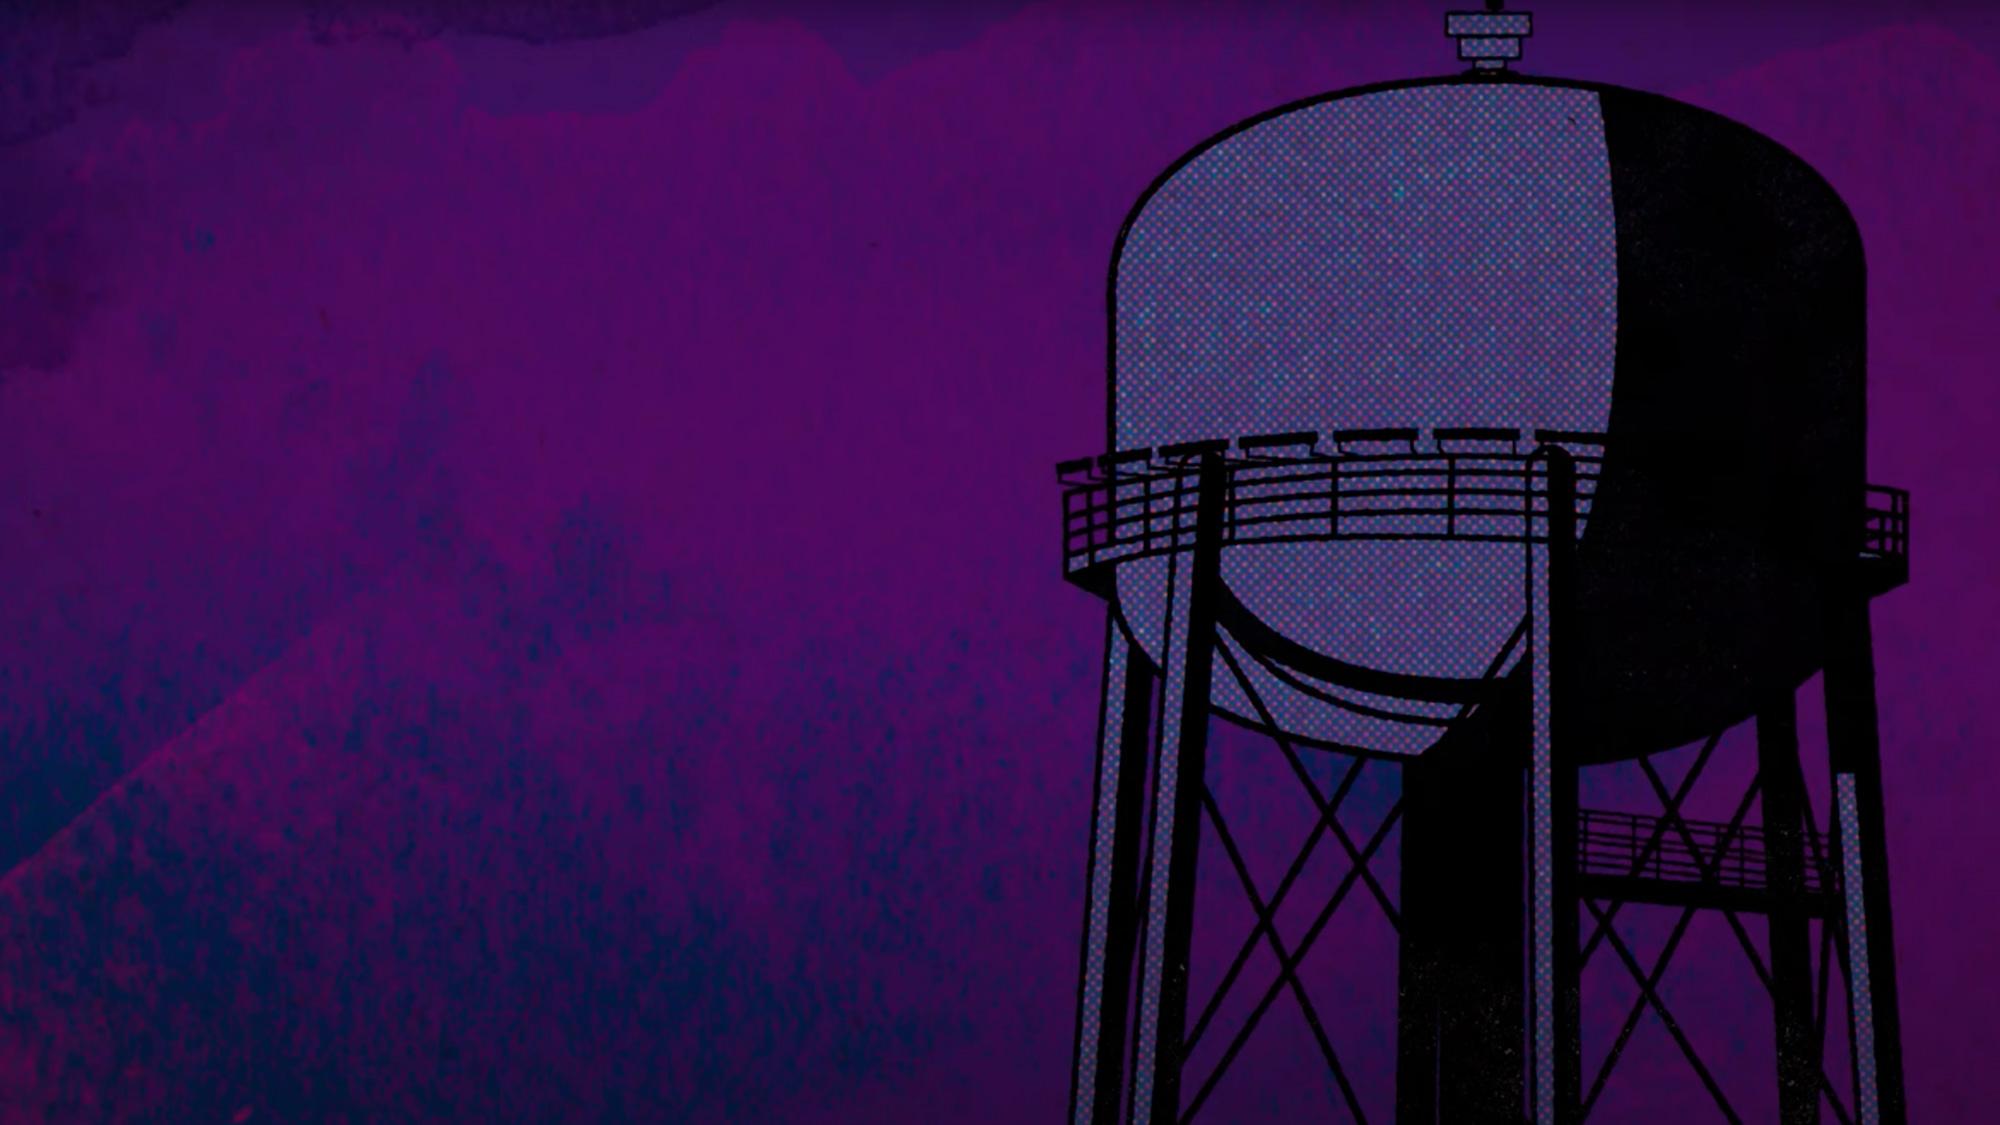 A comic book style illustration of the ϲʿͼ water tower